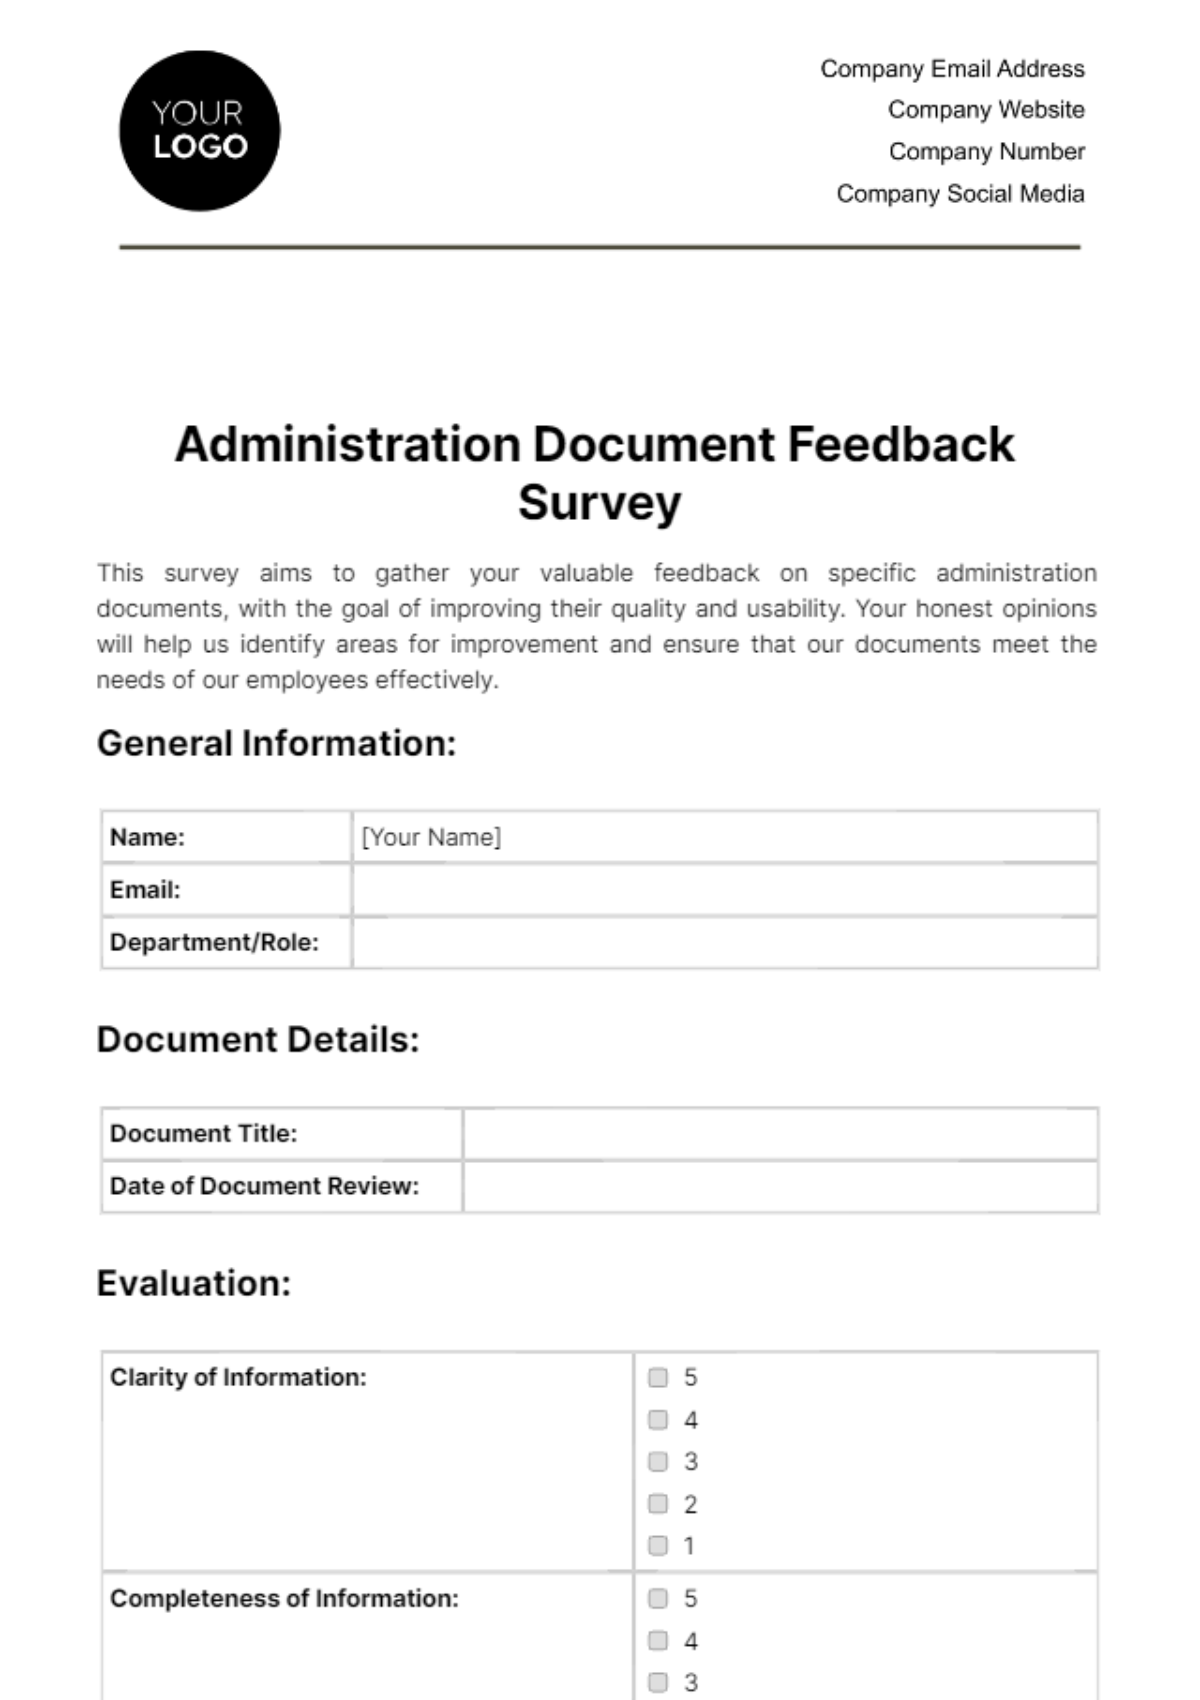 Administration Document Feedback Survey Template